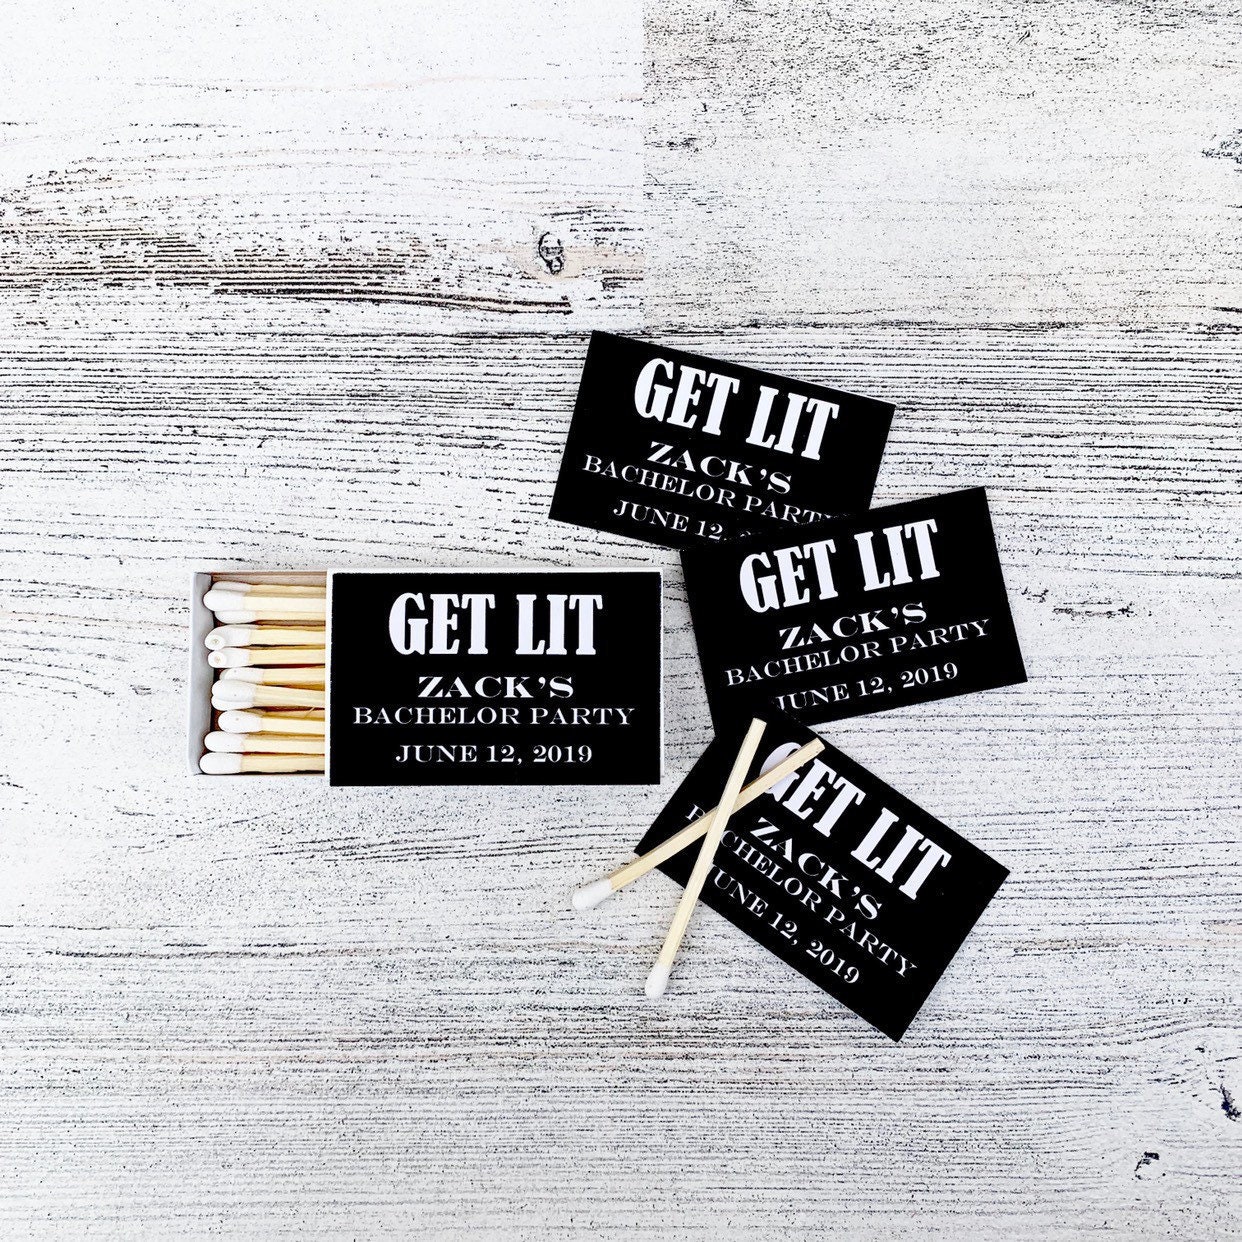 Matchbox Bachelor Party Favors - Black and White Matchbox Favors - Matchbox  Favors Bridal Party - Customizable